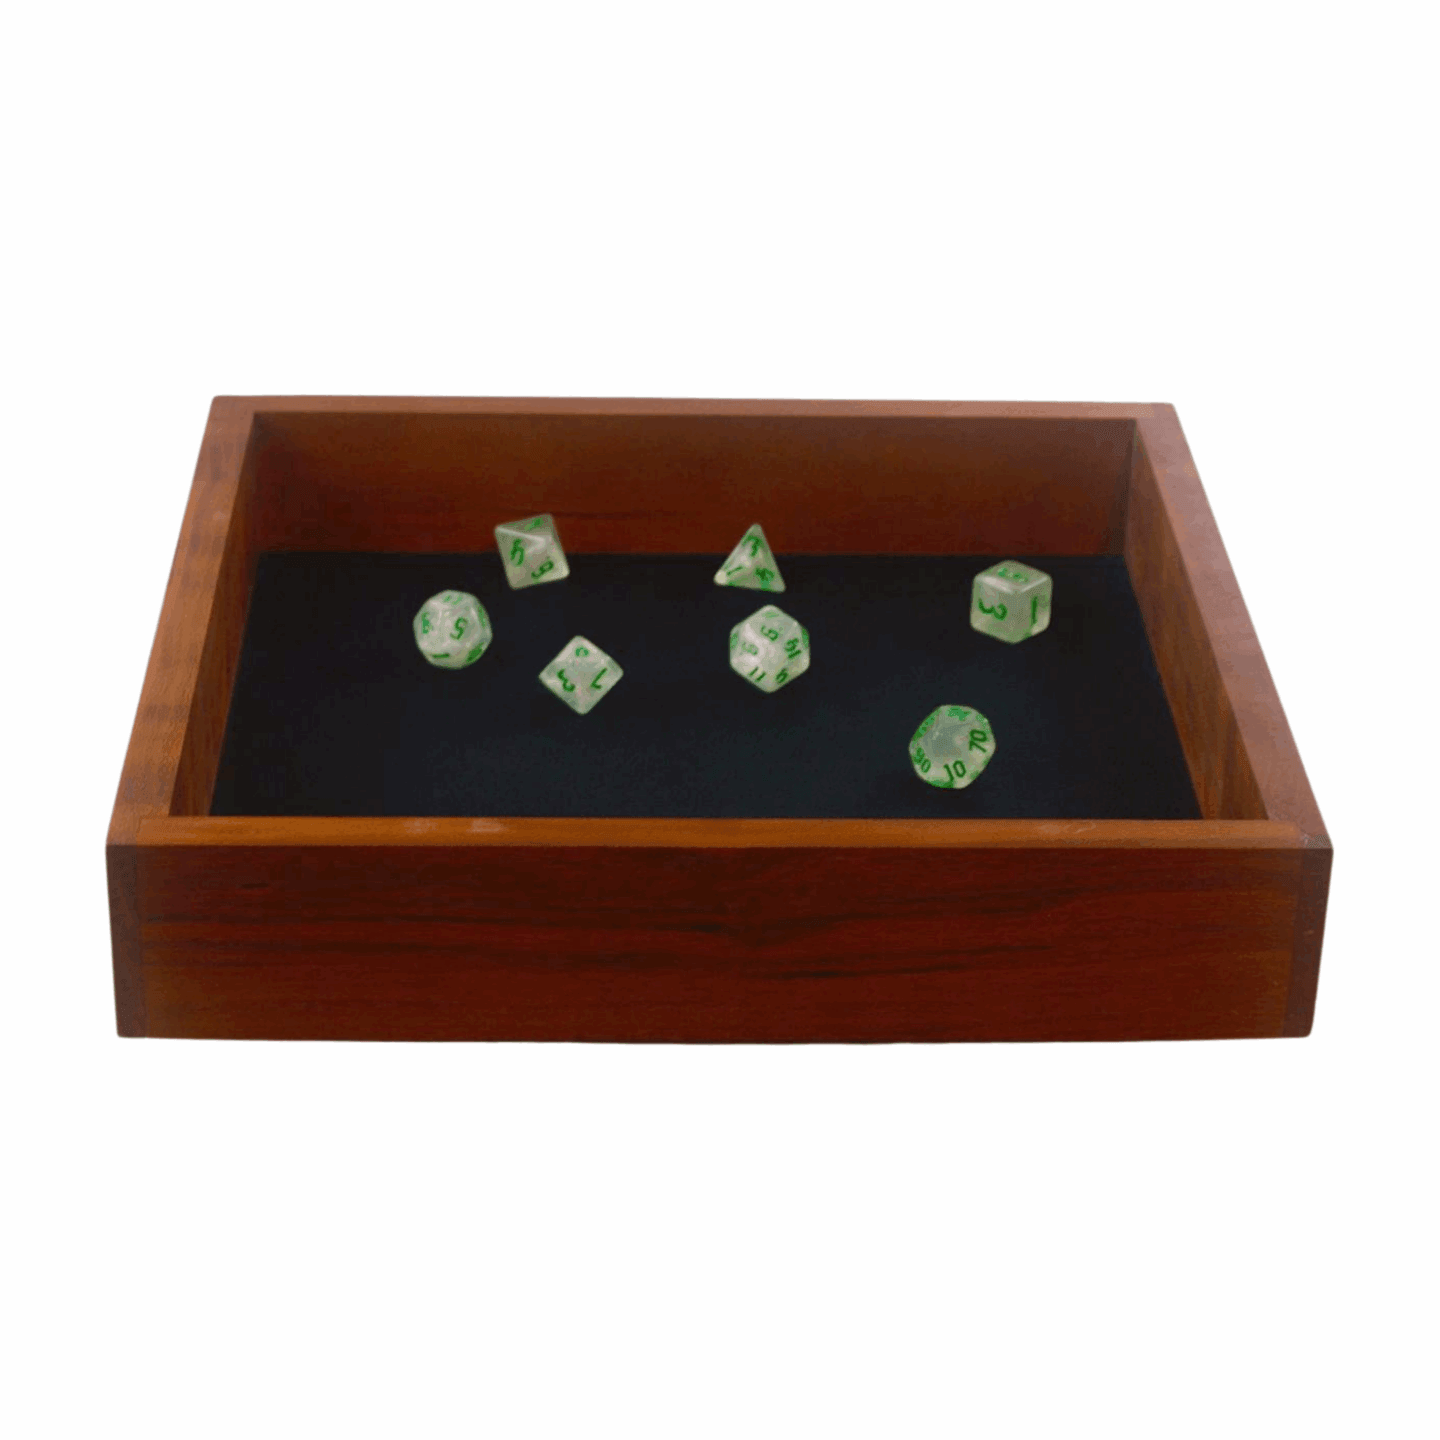 Large Cherry Wood Dice Tray for Tabletop Gaming - Dragon Armor Games